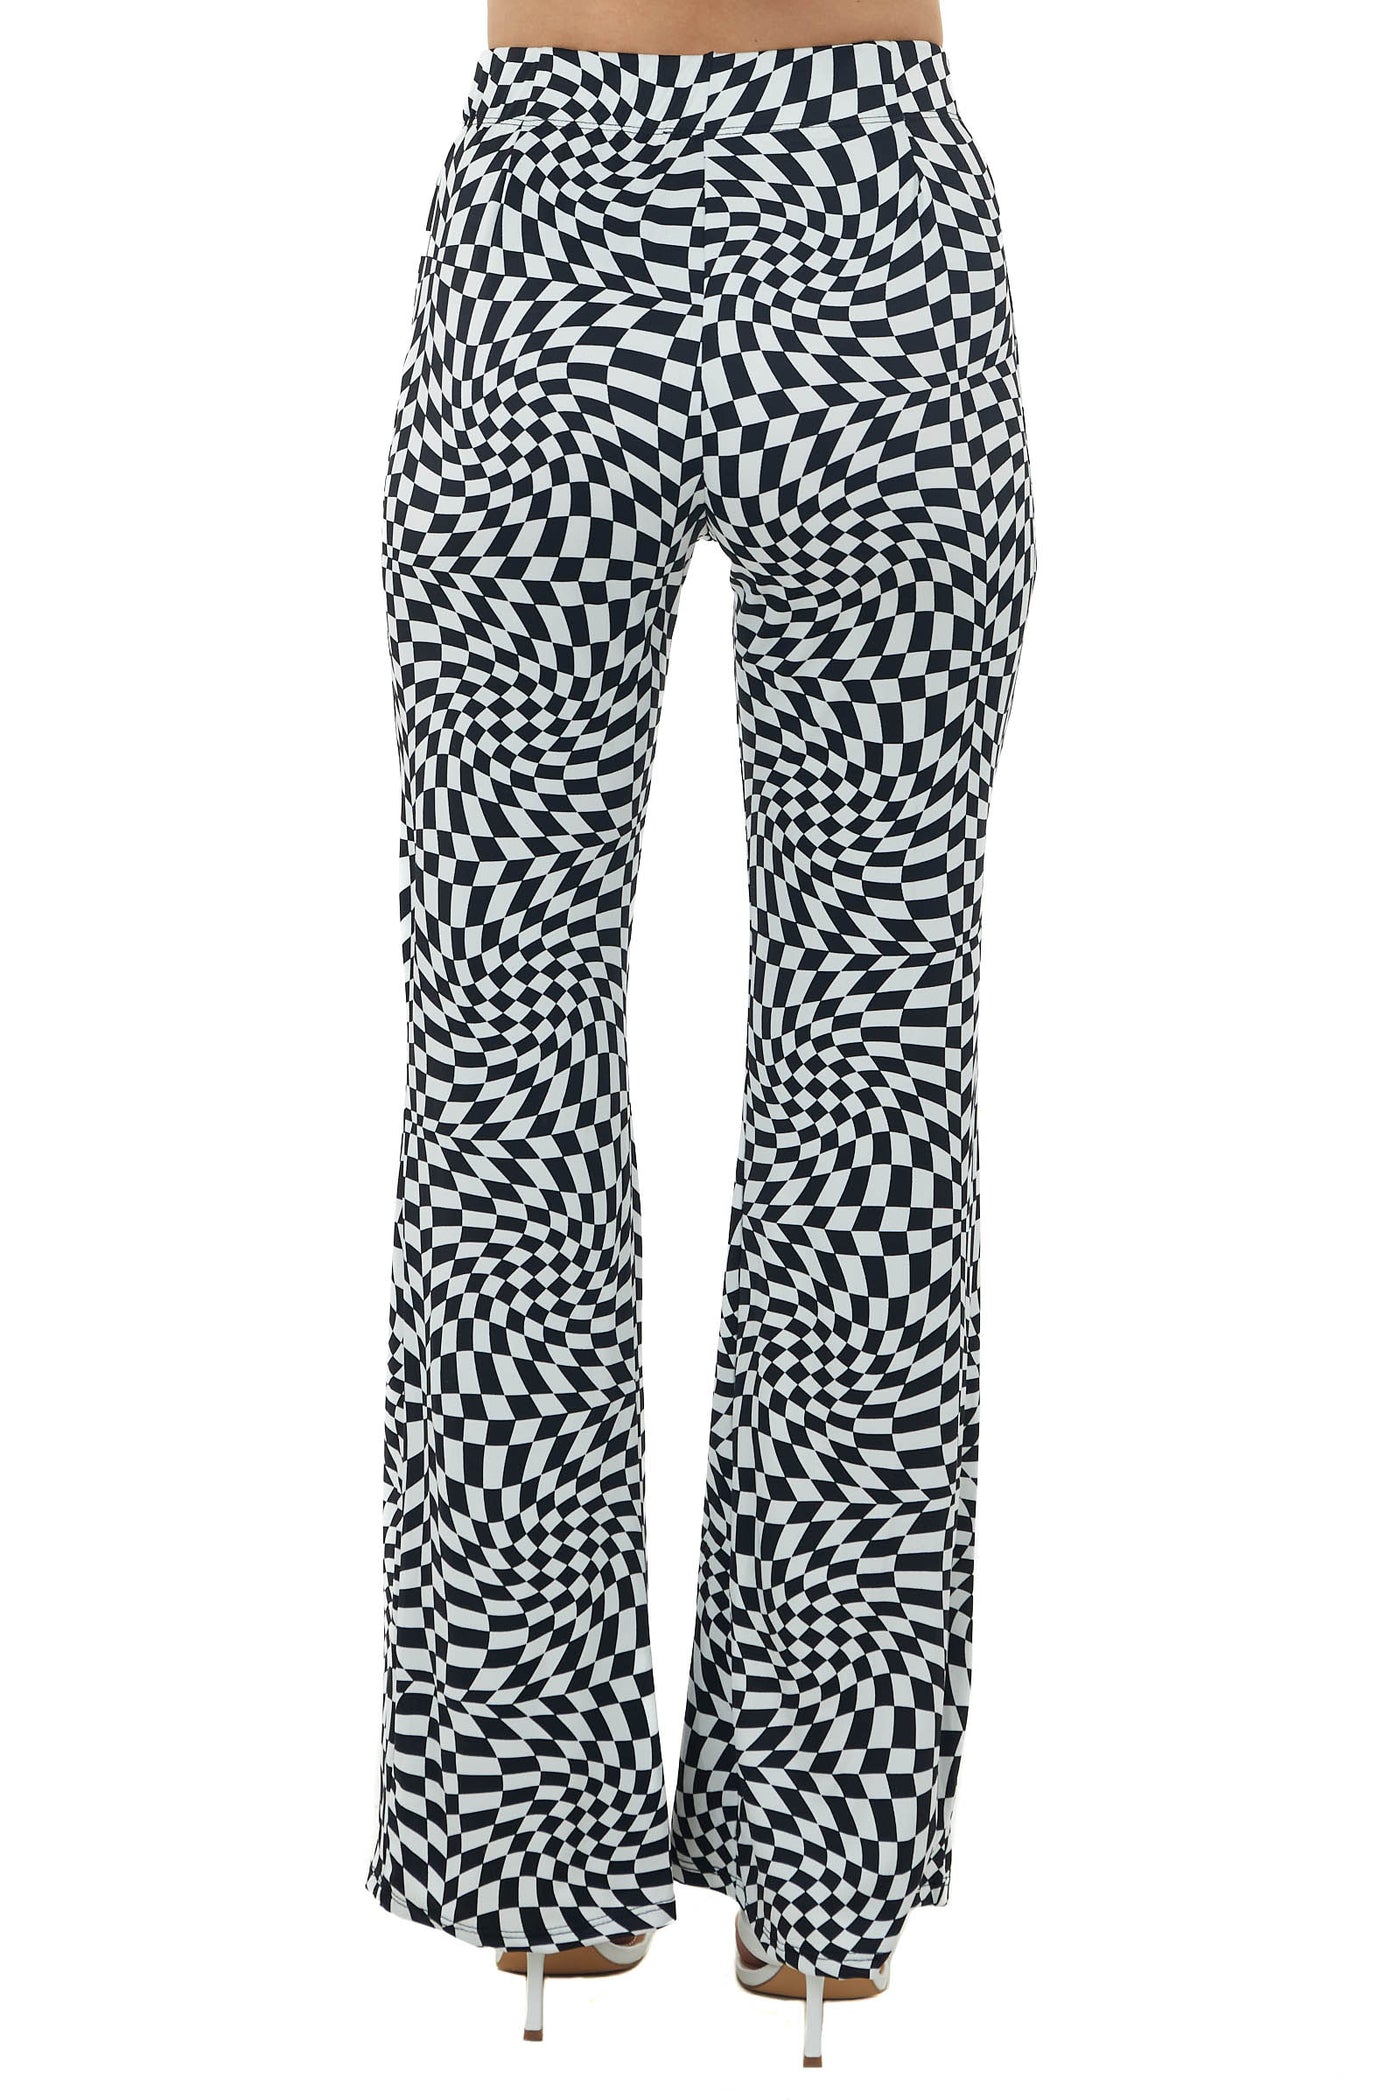 Black and Off White Abstract Checkered Print Pants